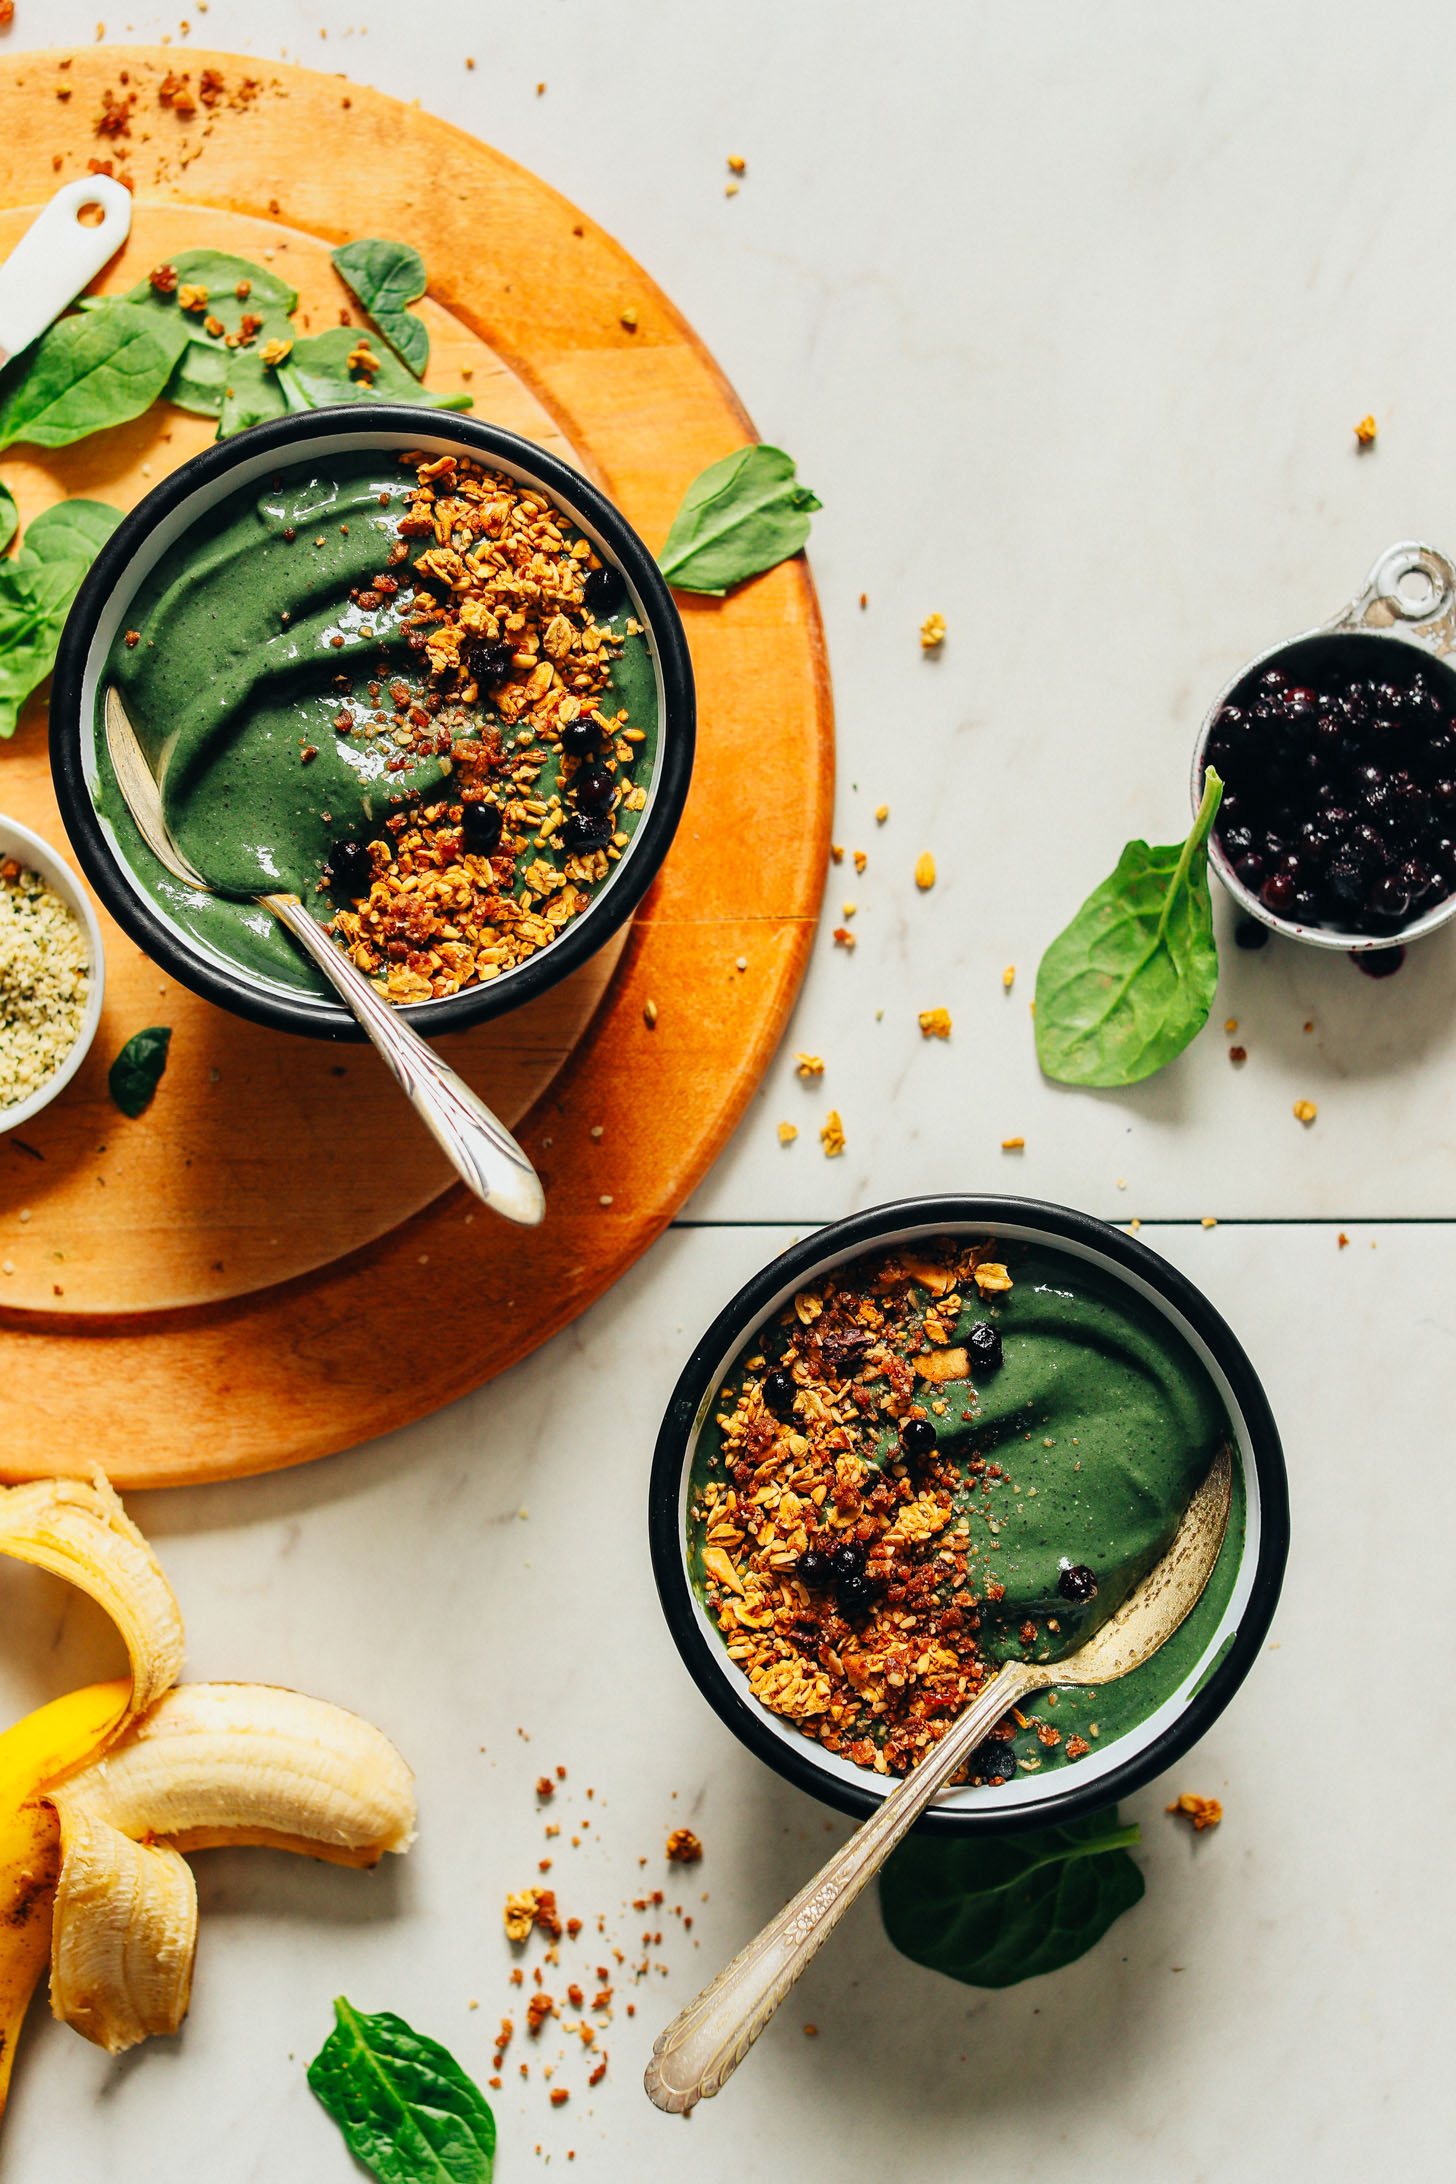 Two Peanut Butter Banana Super Green Smoothie Bowls for an antioxidant-packed vegan breakfast